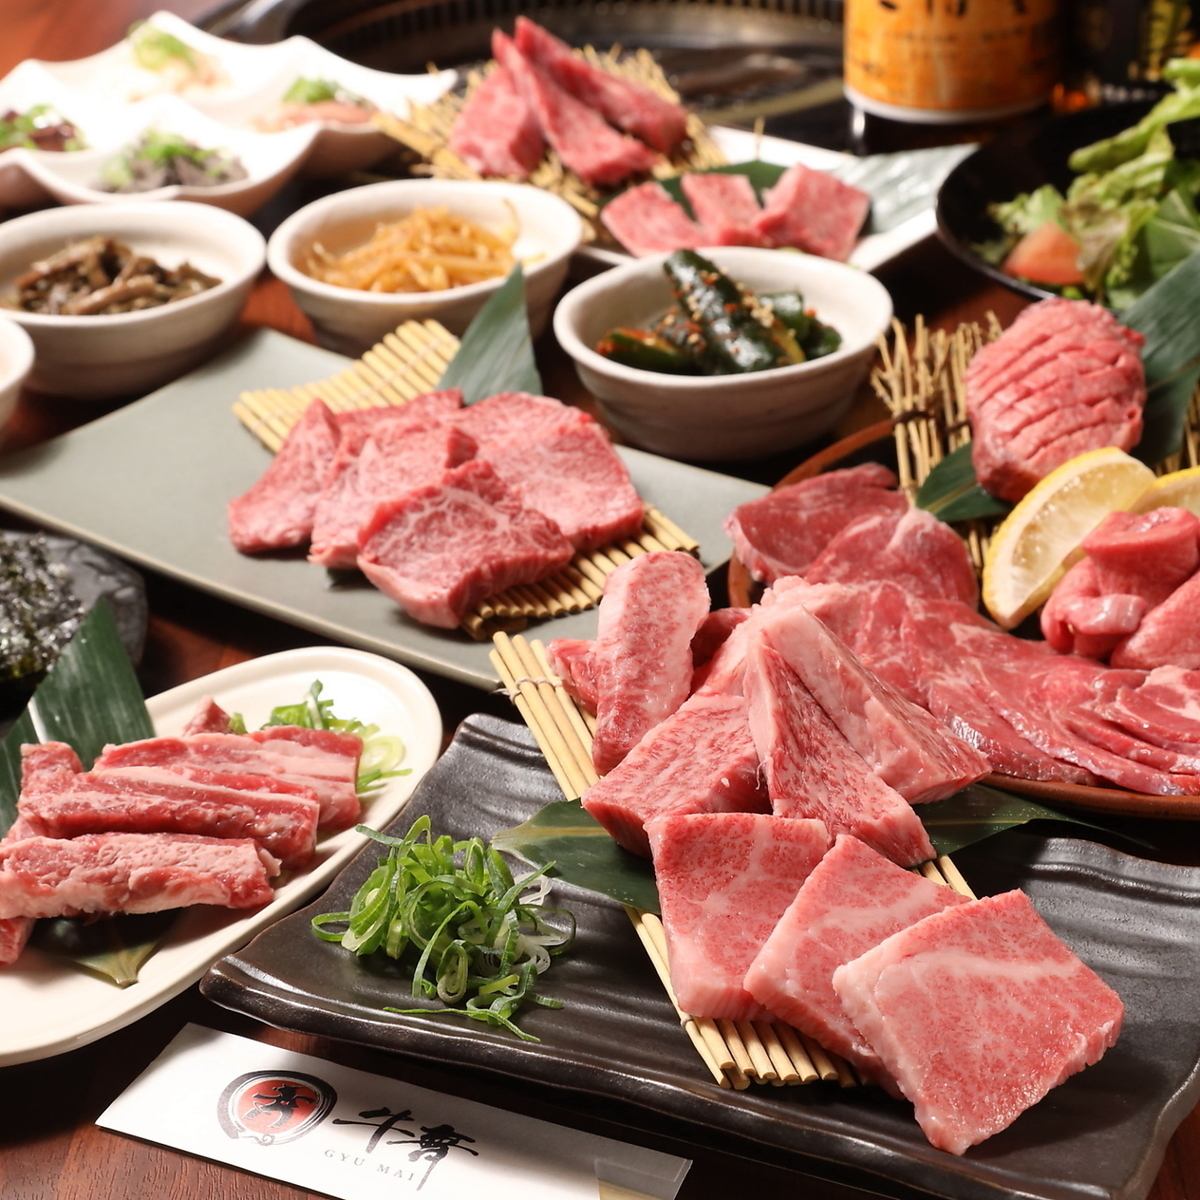 Our prized thick-sliced beef tongue! Please try it when you visit us♪